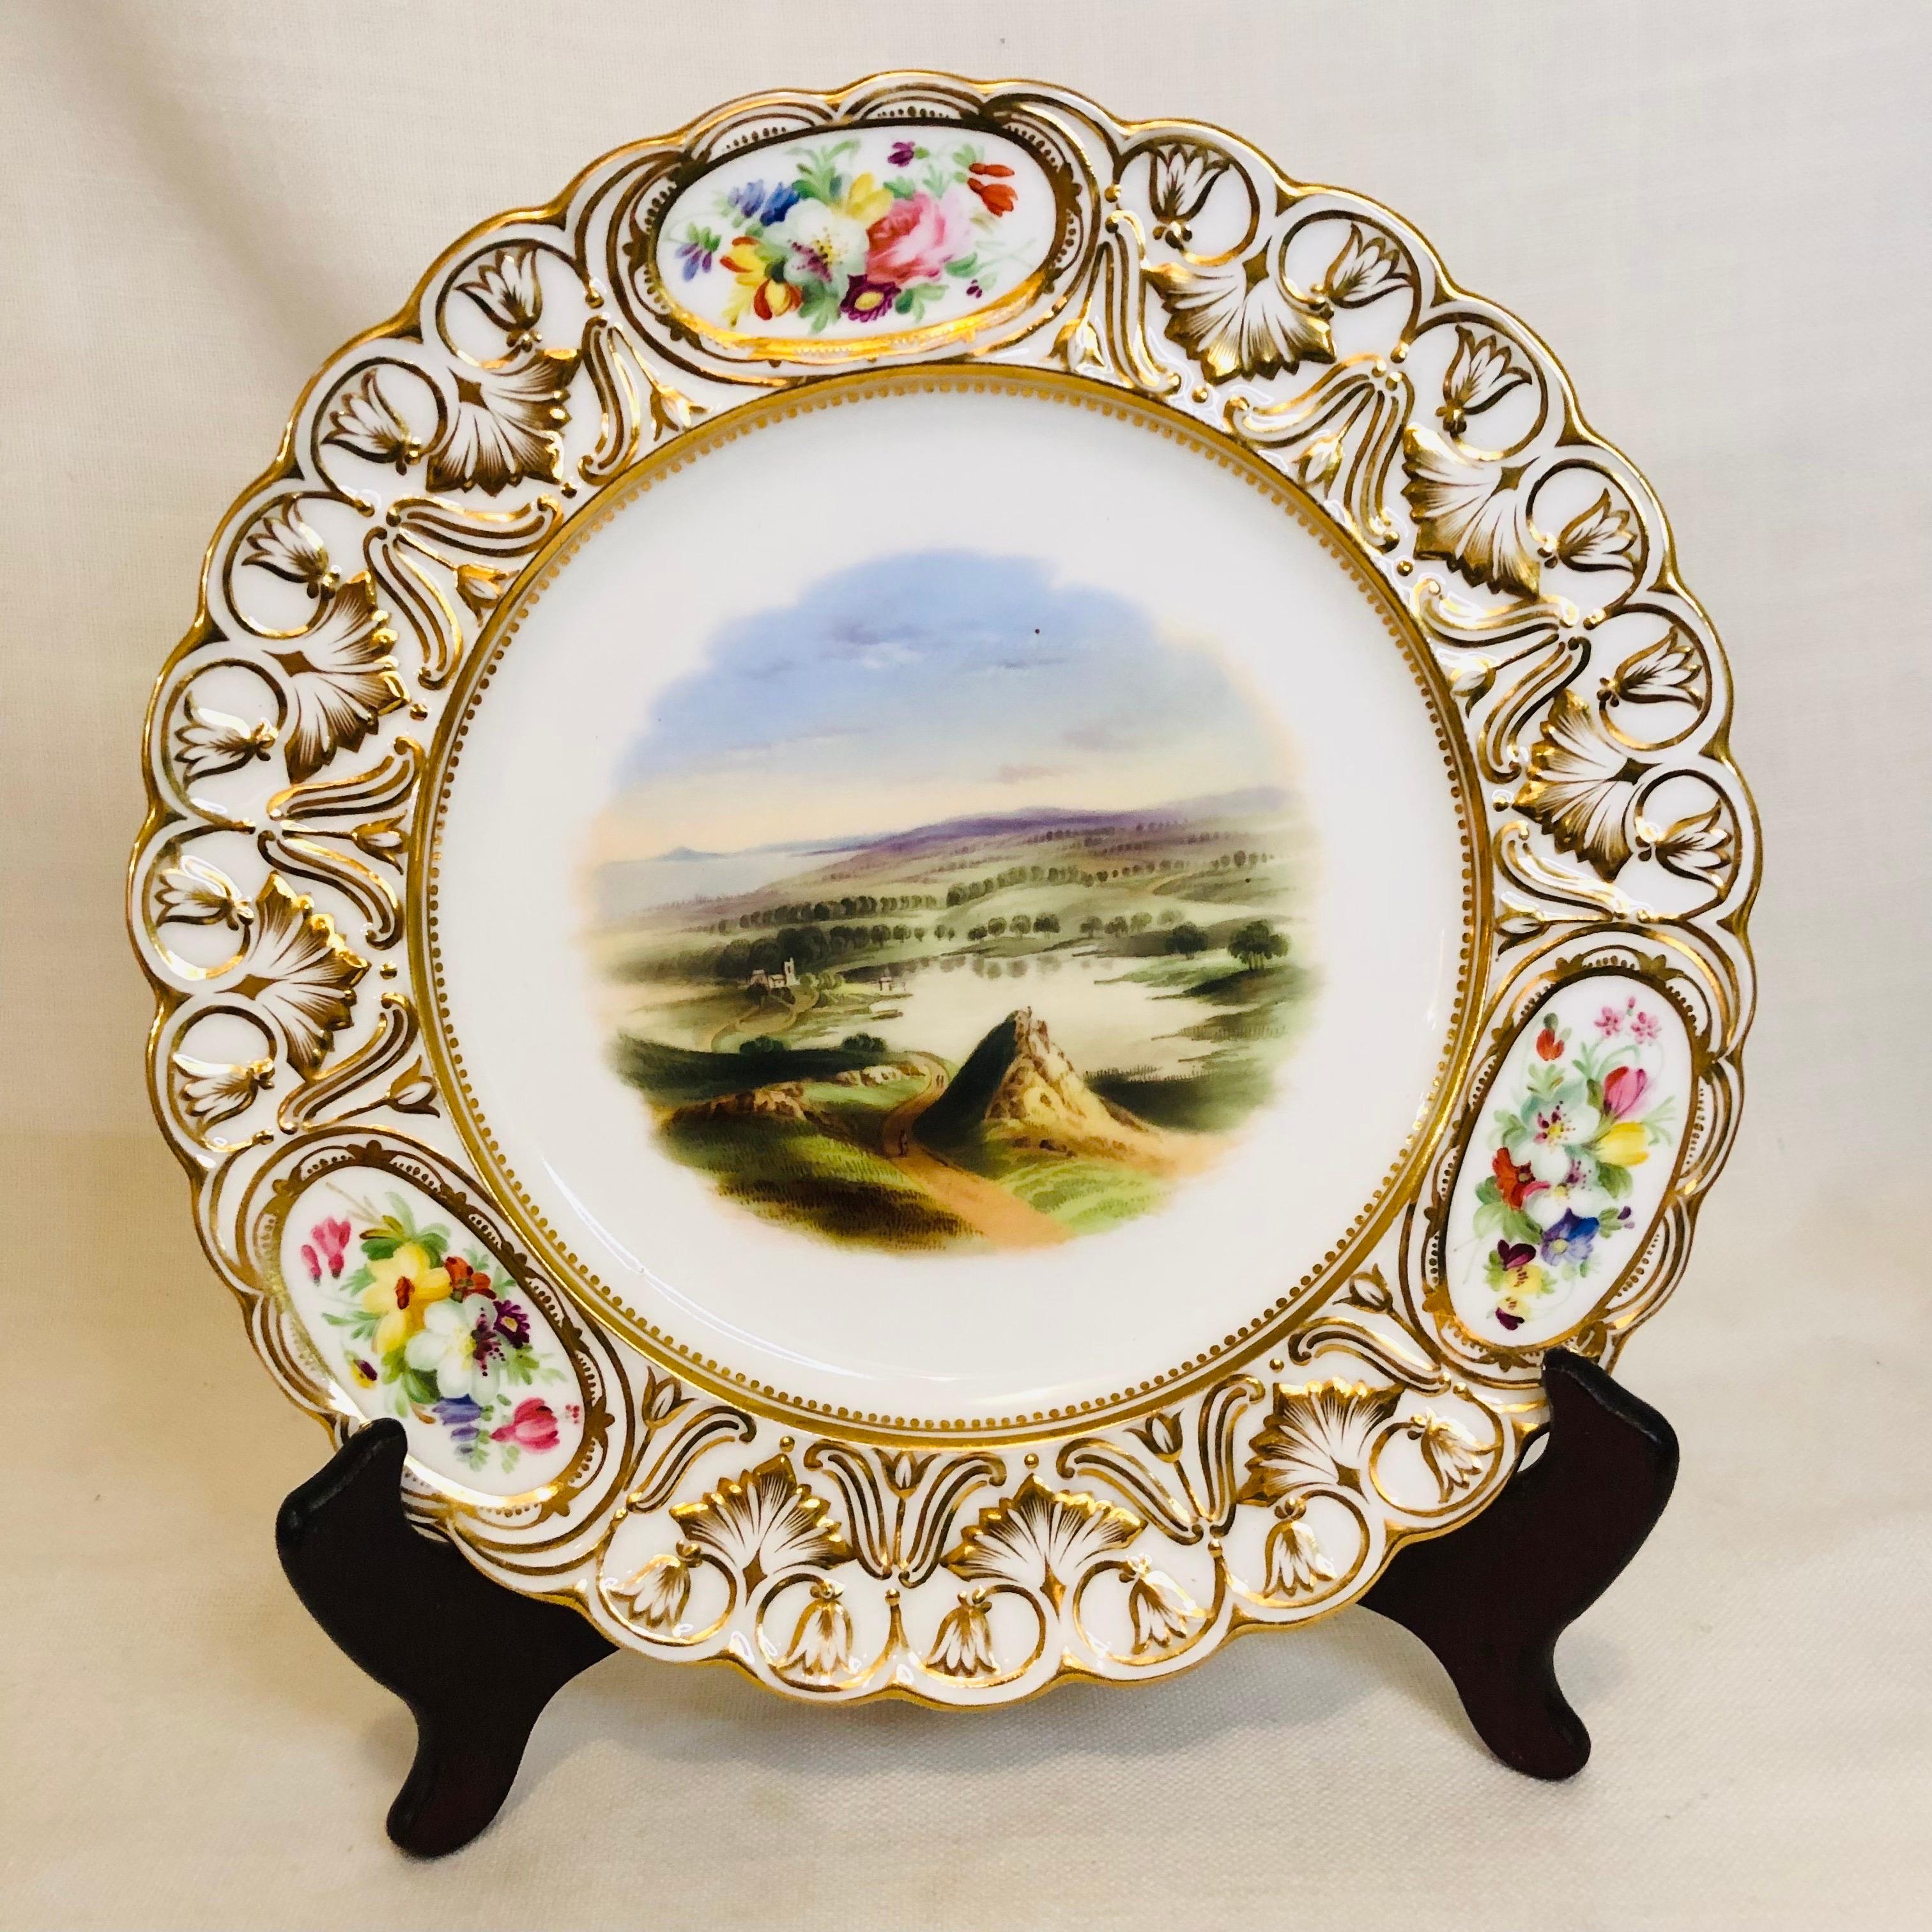 Set of 16 19th Century Coalport Plates Each Hand-Painted with Magnificent Scenes For Sale 5